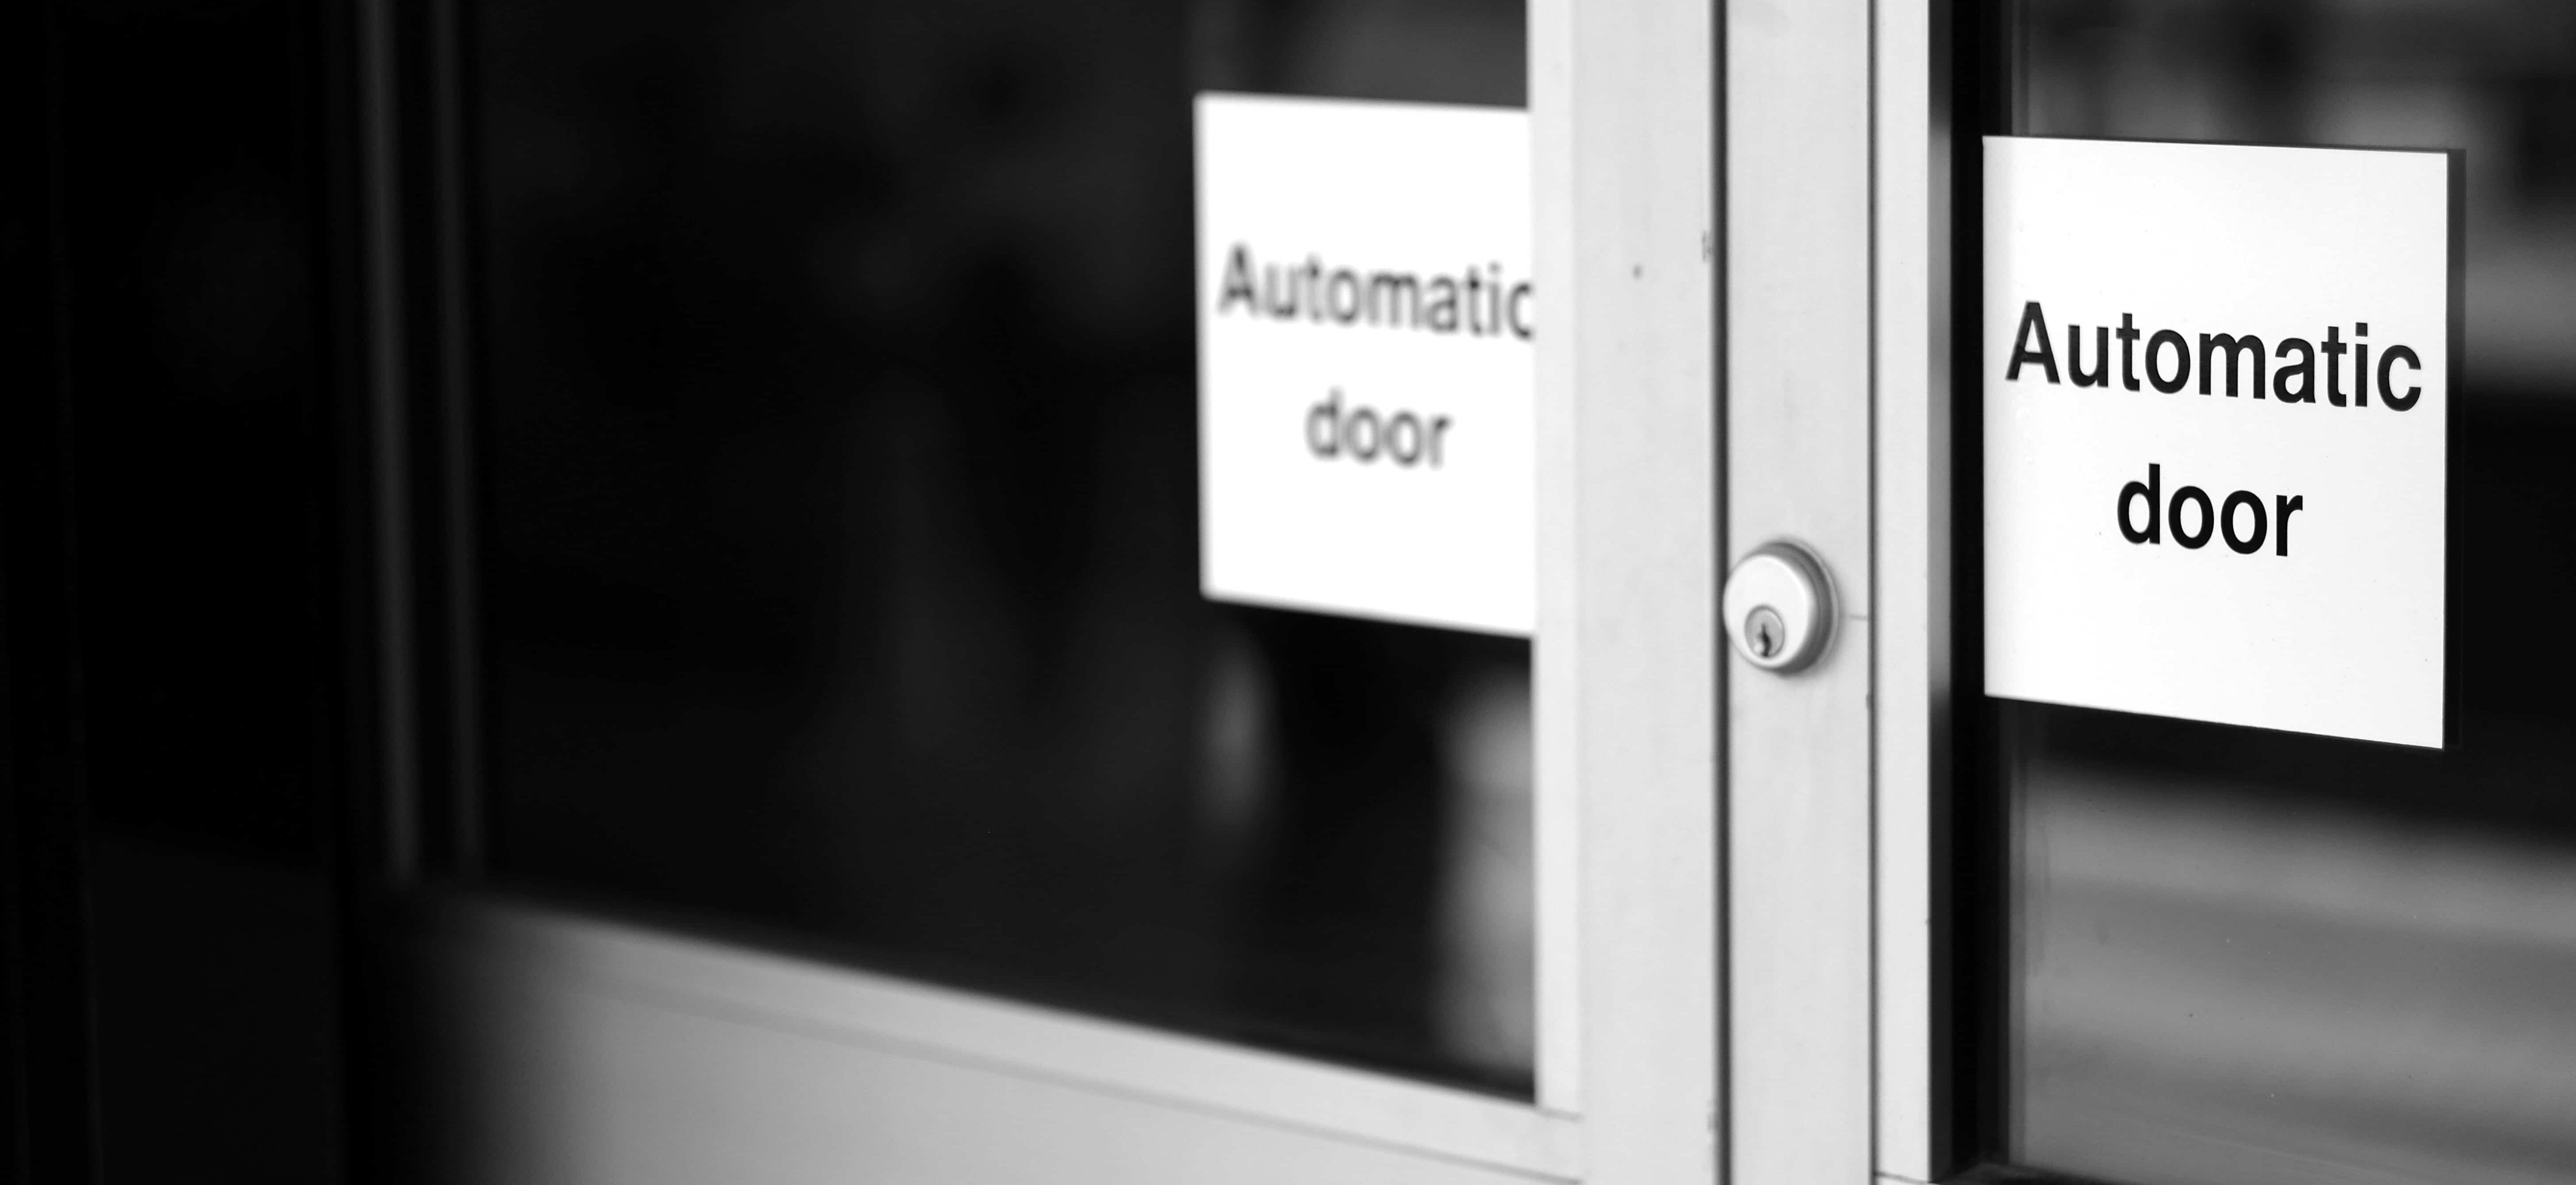 An AAADM certification is needed to work on automatic glass and metal doors like this one.